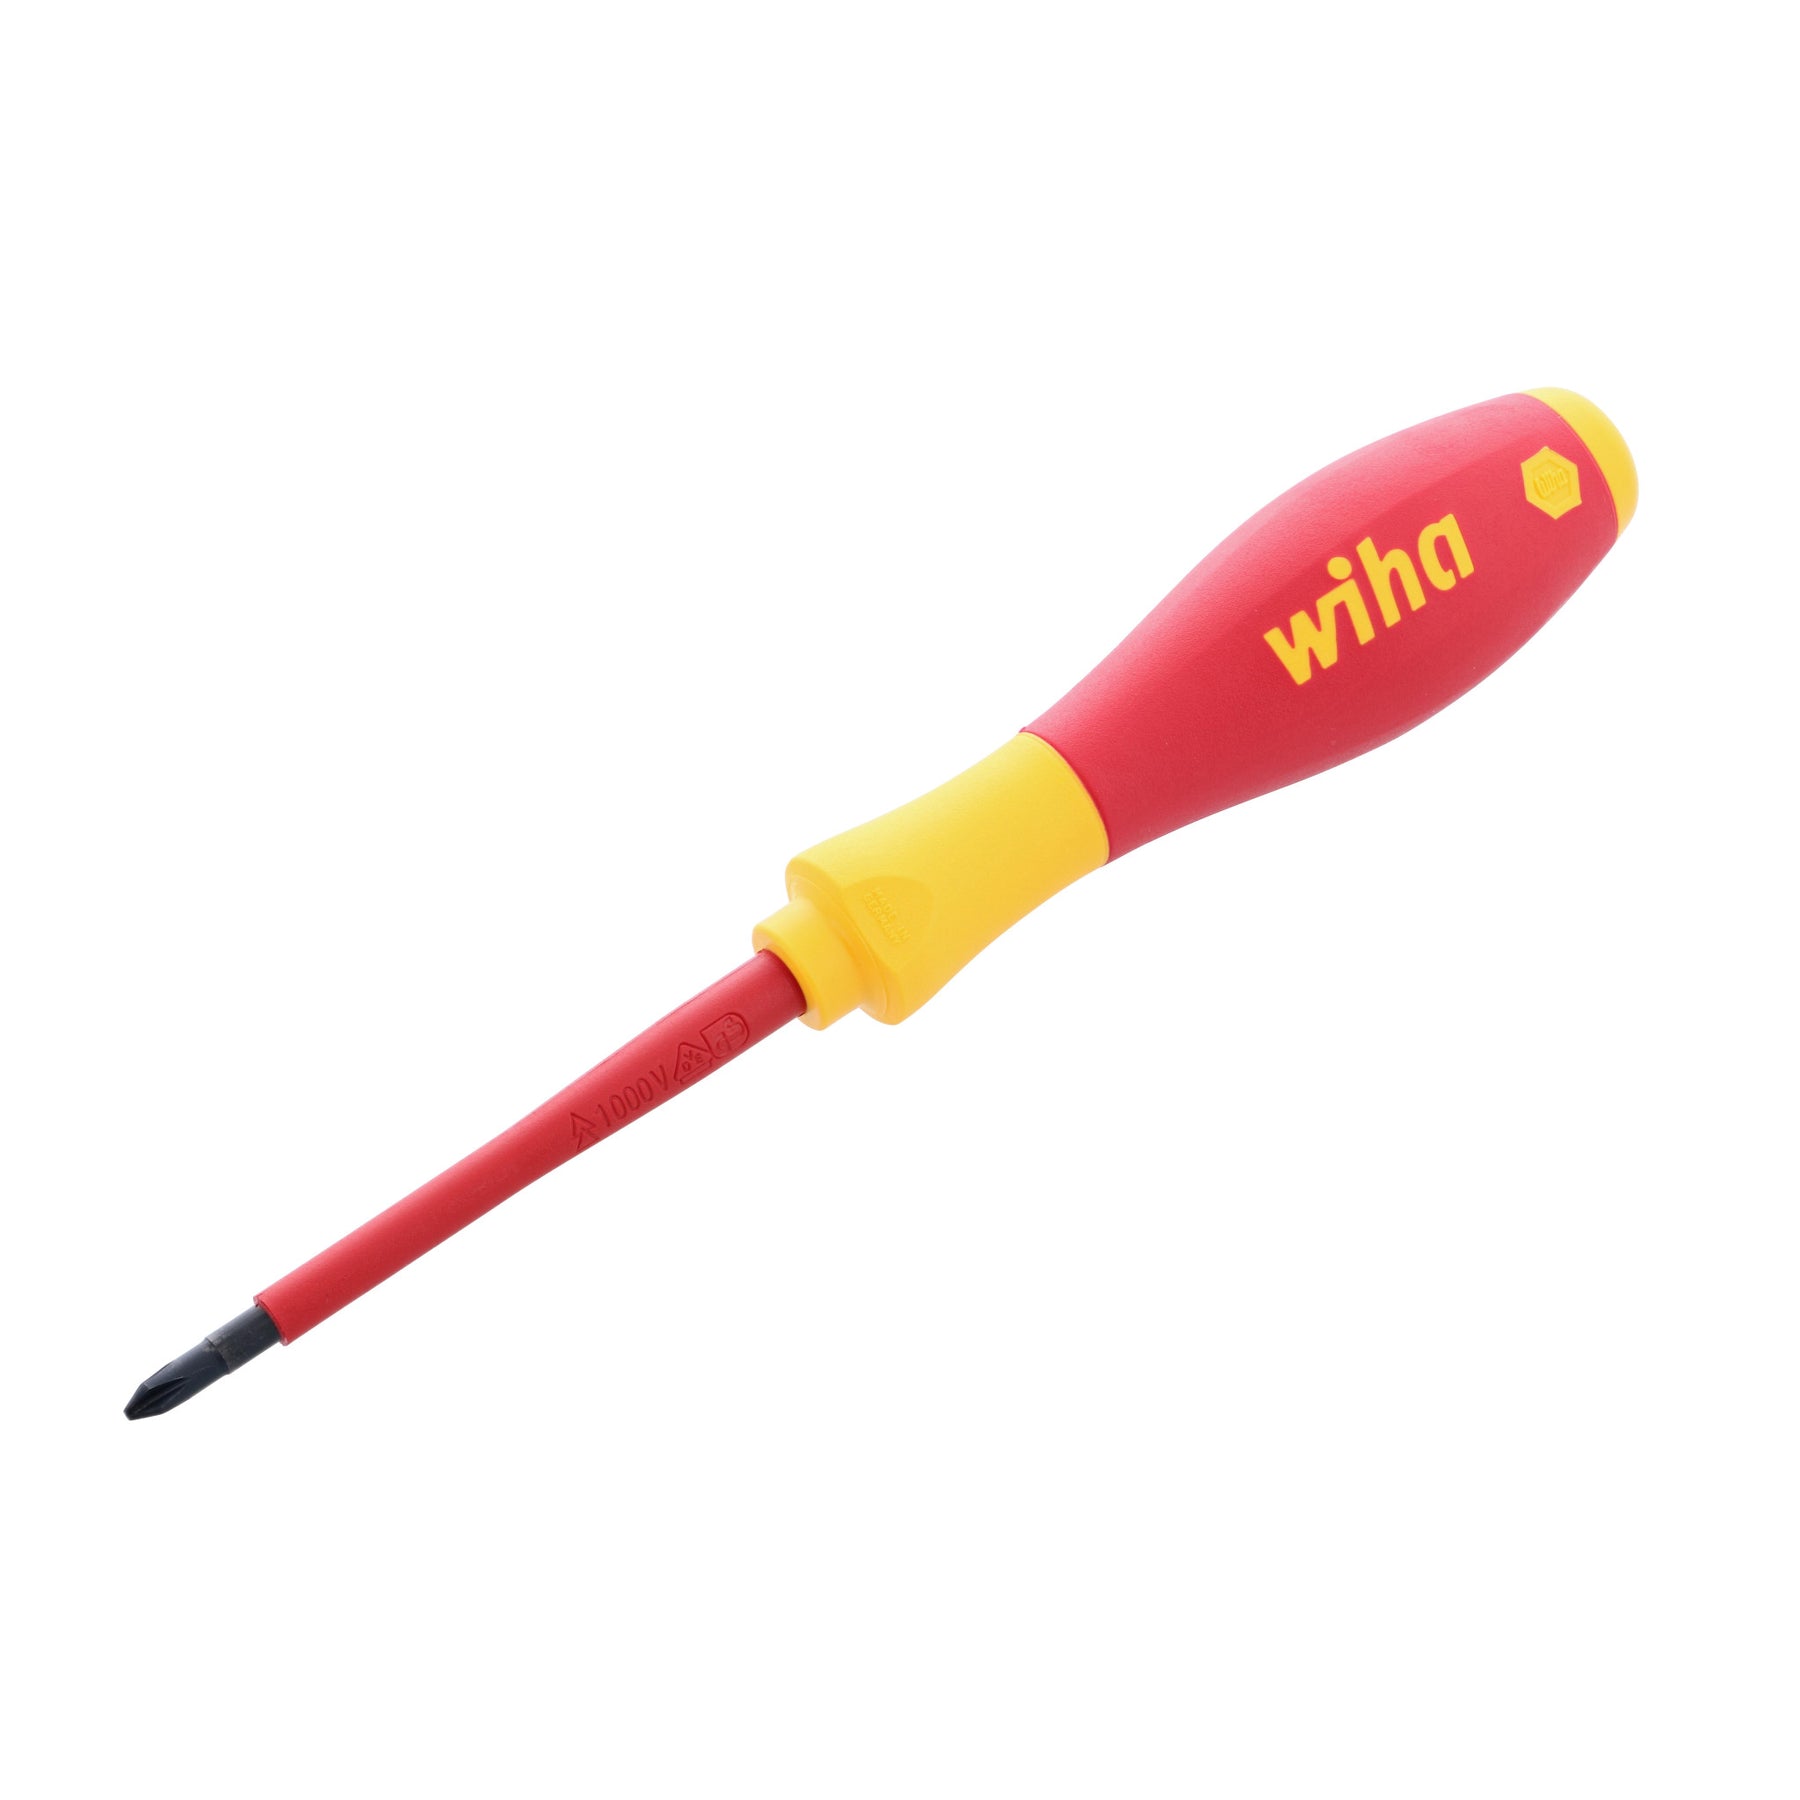 Wiha 32101 Insulated Phillips Screwdriver #1 Made in Germany